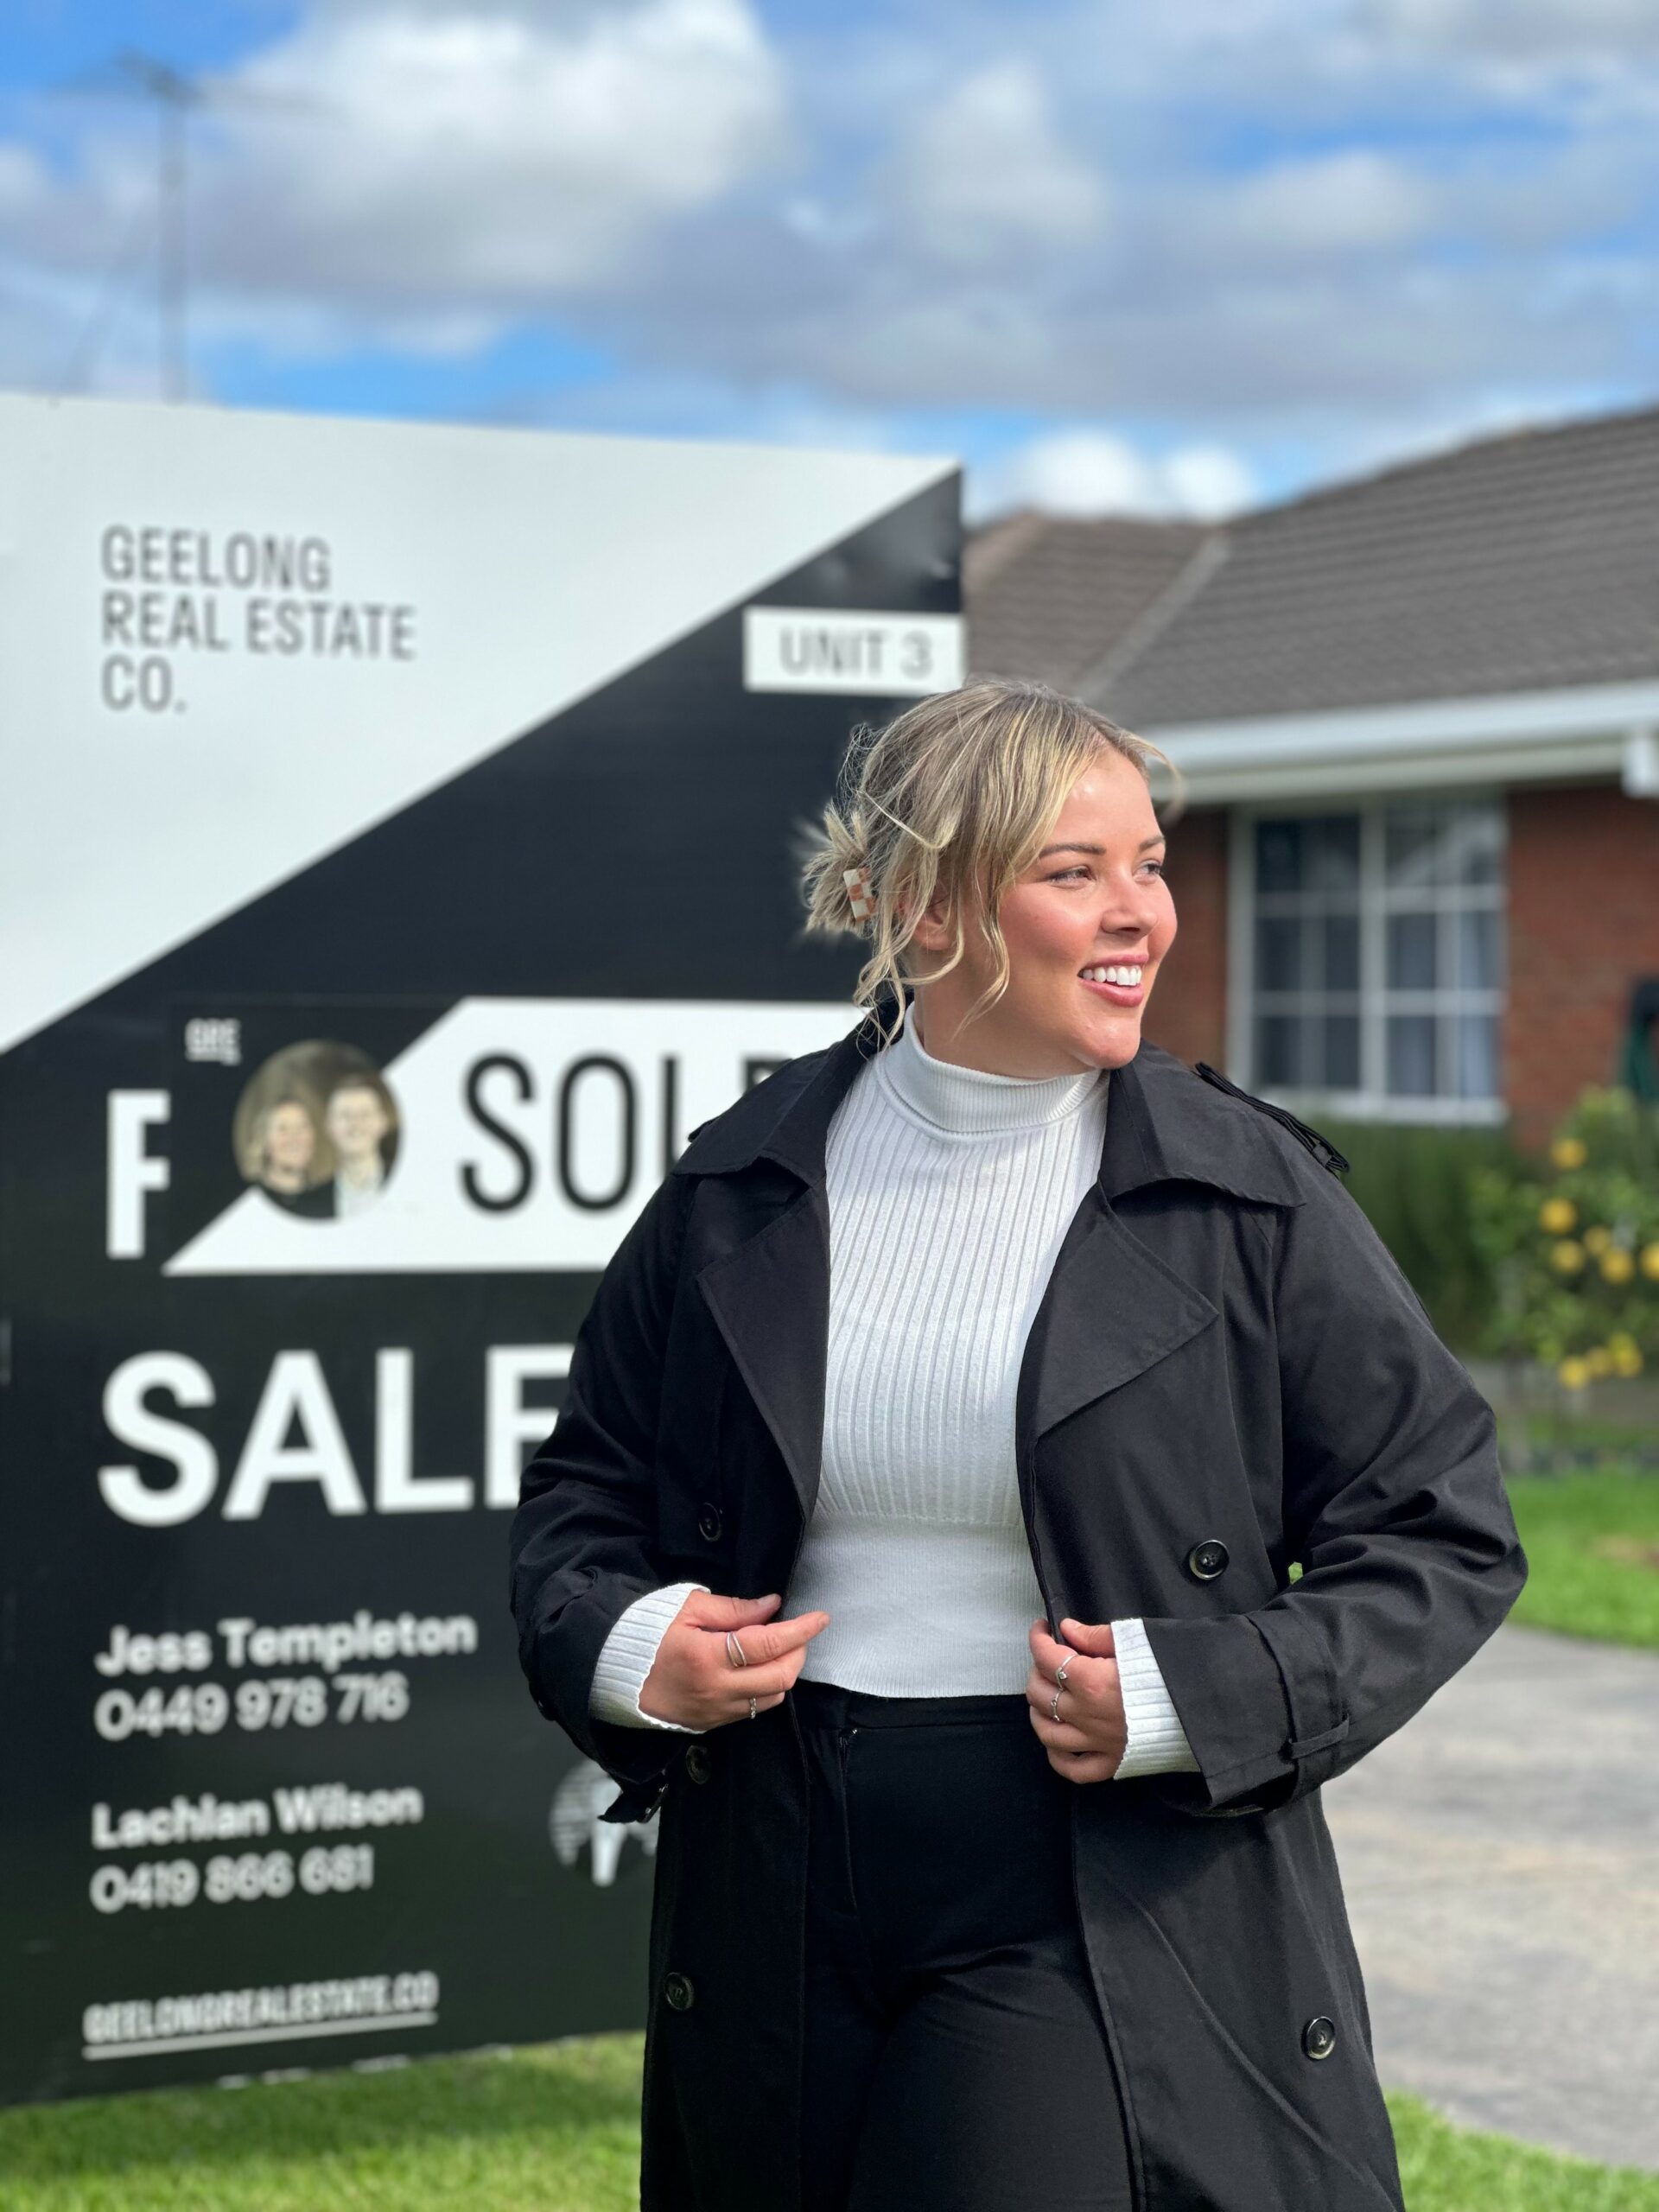 Jess Templeton Geelong Real Estate Co